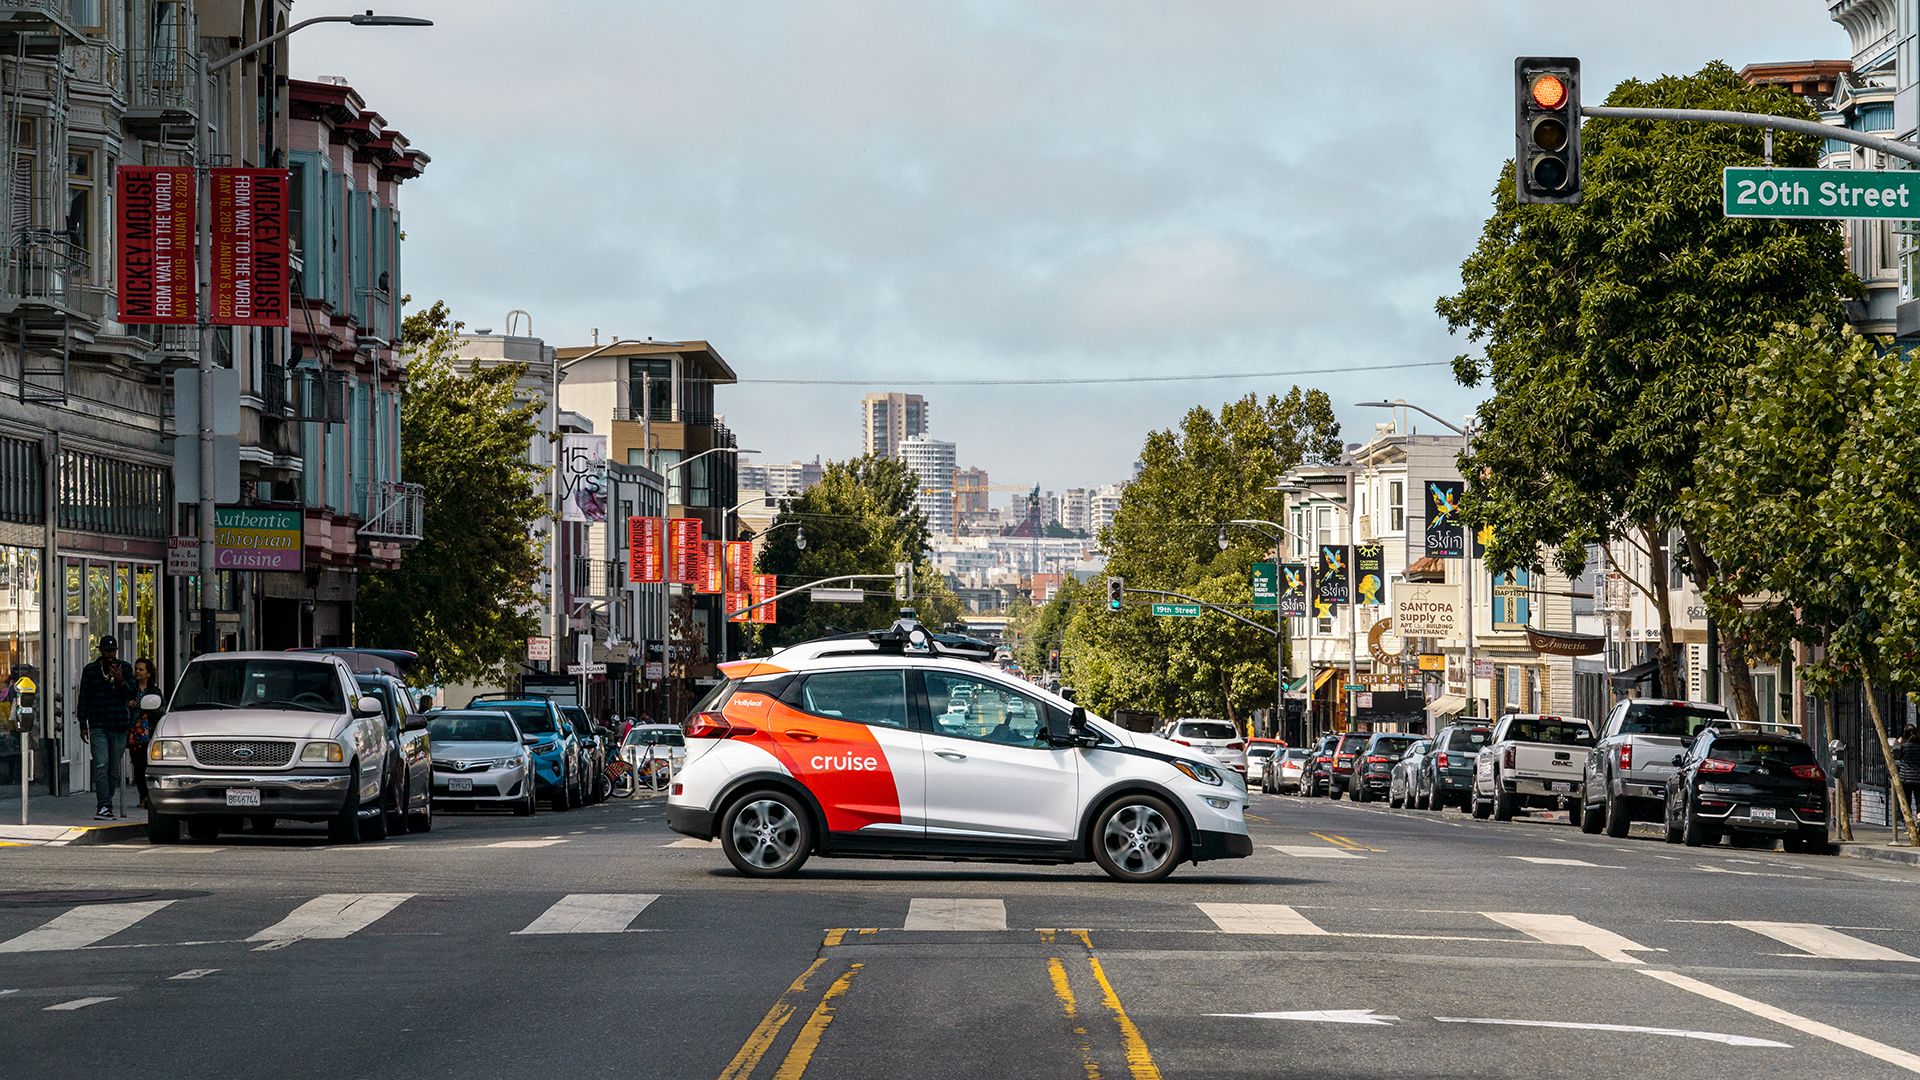 Image of Cruise's self-driving test car in San Francisco